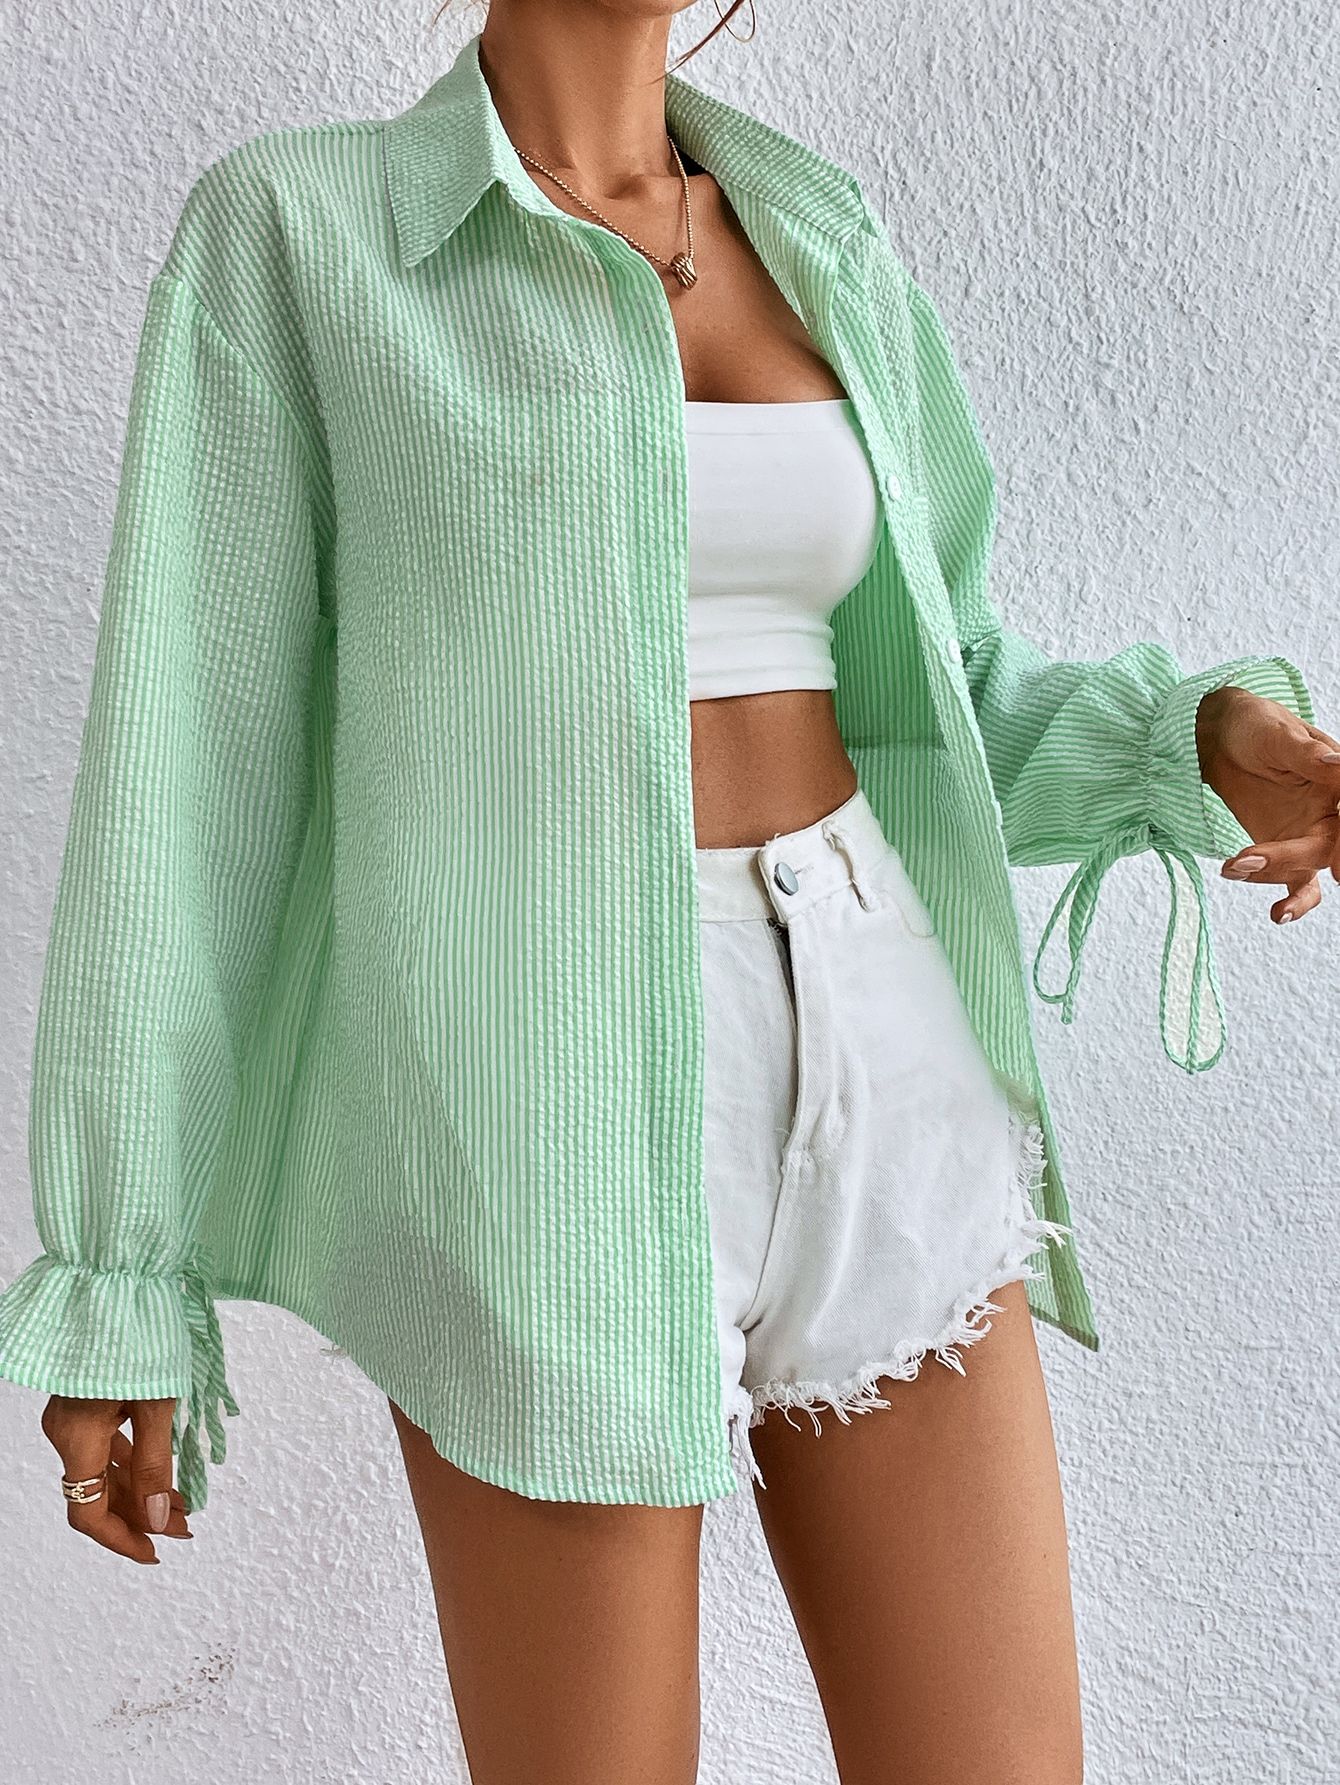 How to Wear Mint Green Shirt: Best 13 Refreshing Outfit Ideas for Women